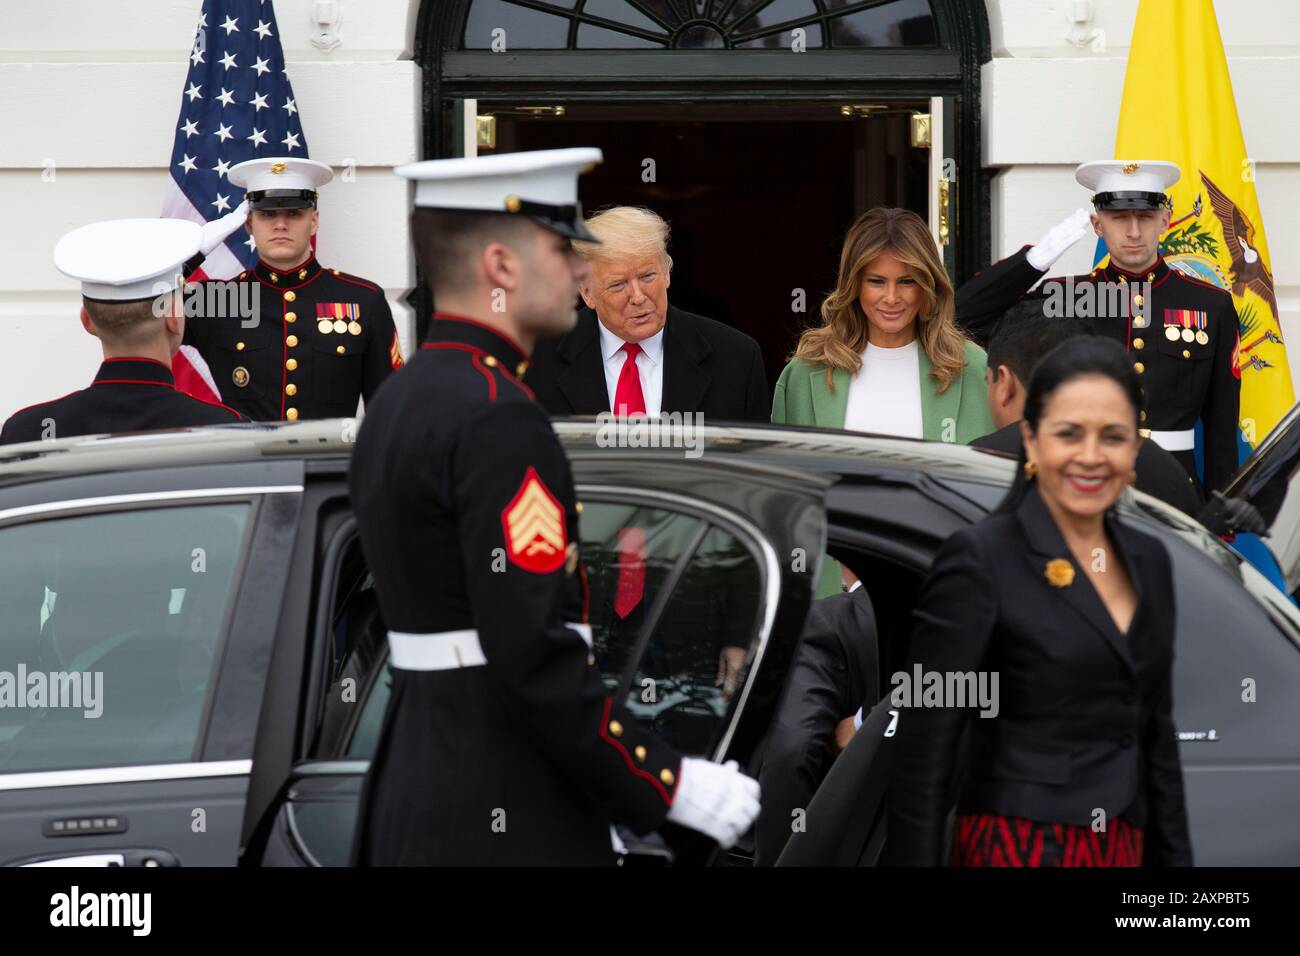 United States President Donald J. Trump and First lady Melania Trump greet the President of Ecuador Lenín Moreno and his wife Rocio Gonzales De Moreno outside the White House in Washington, DC, U.S. on Wednesday, February 12, 2020. Credit: Stefani Reynolds/CNP /MediaPunch Stock Photo